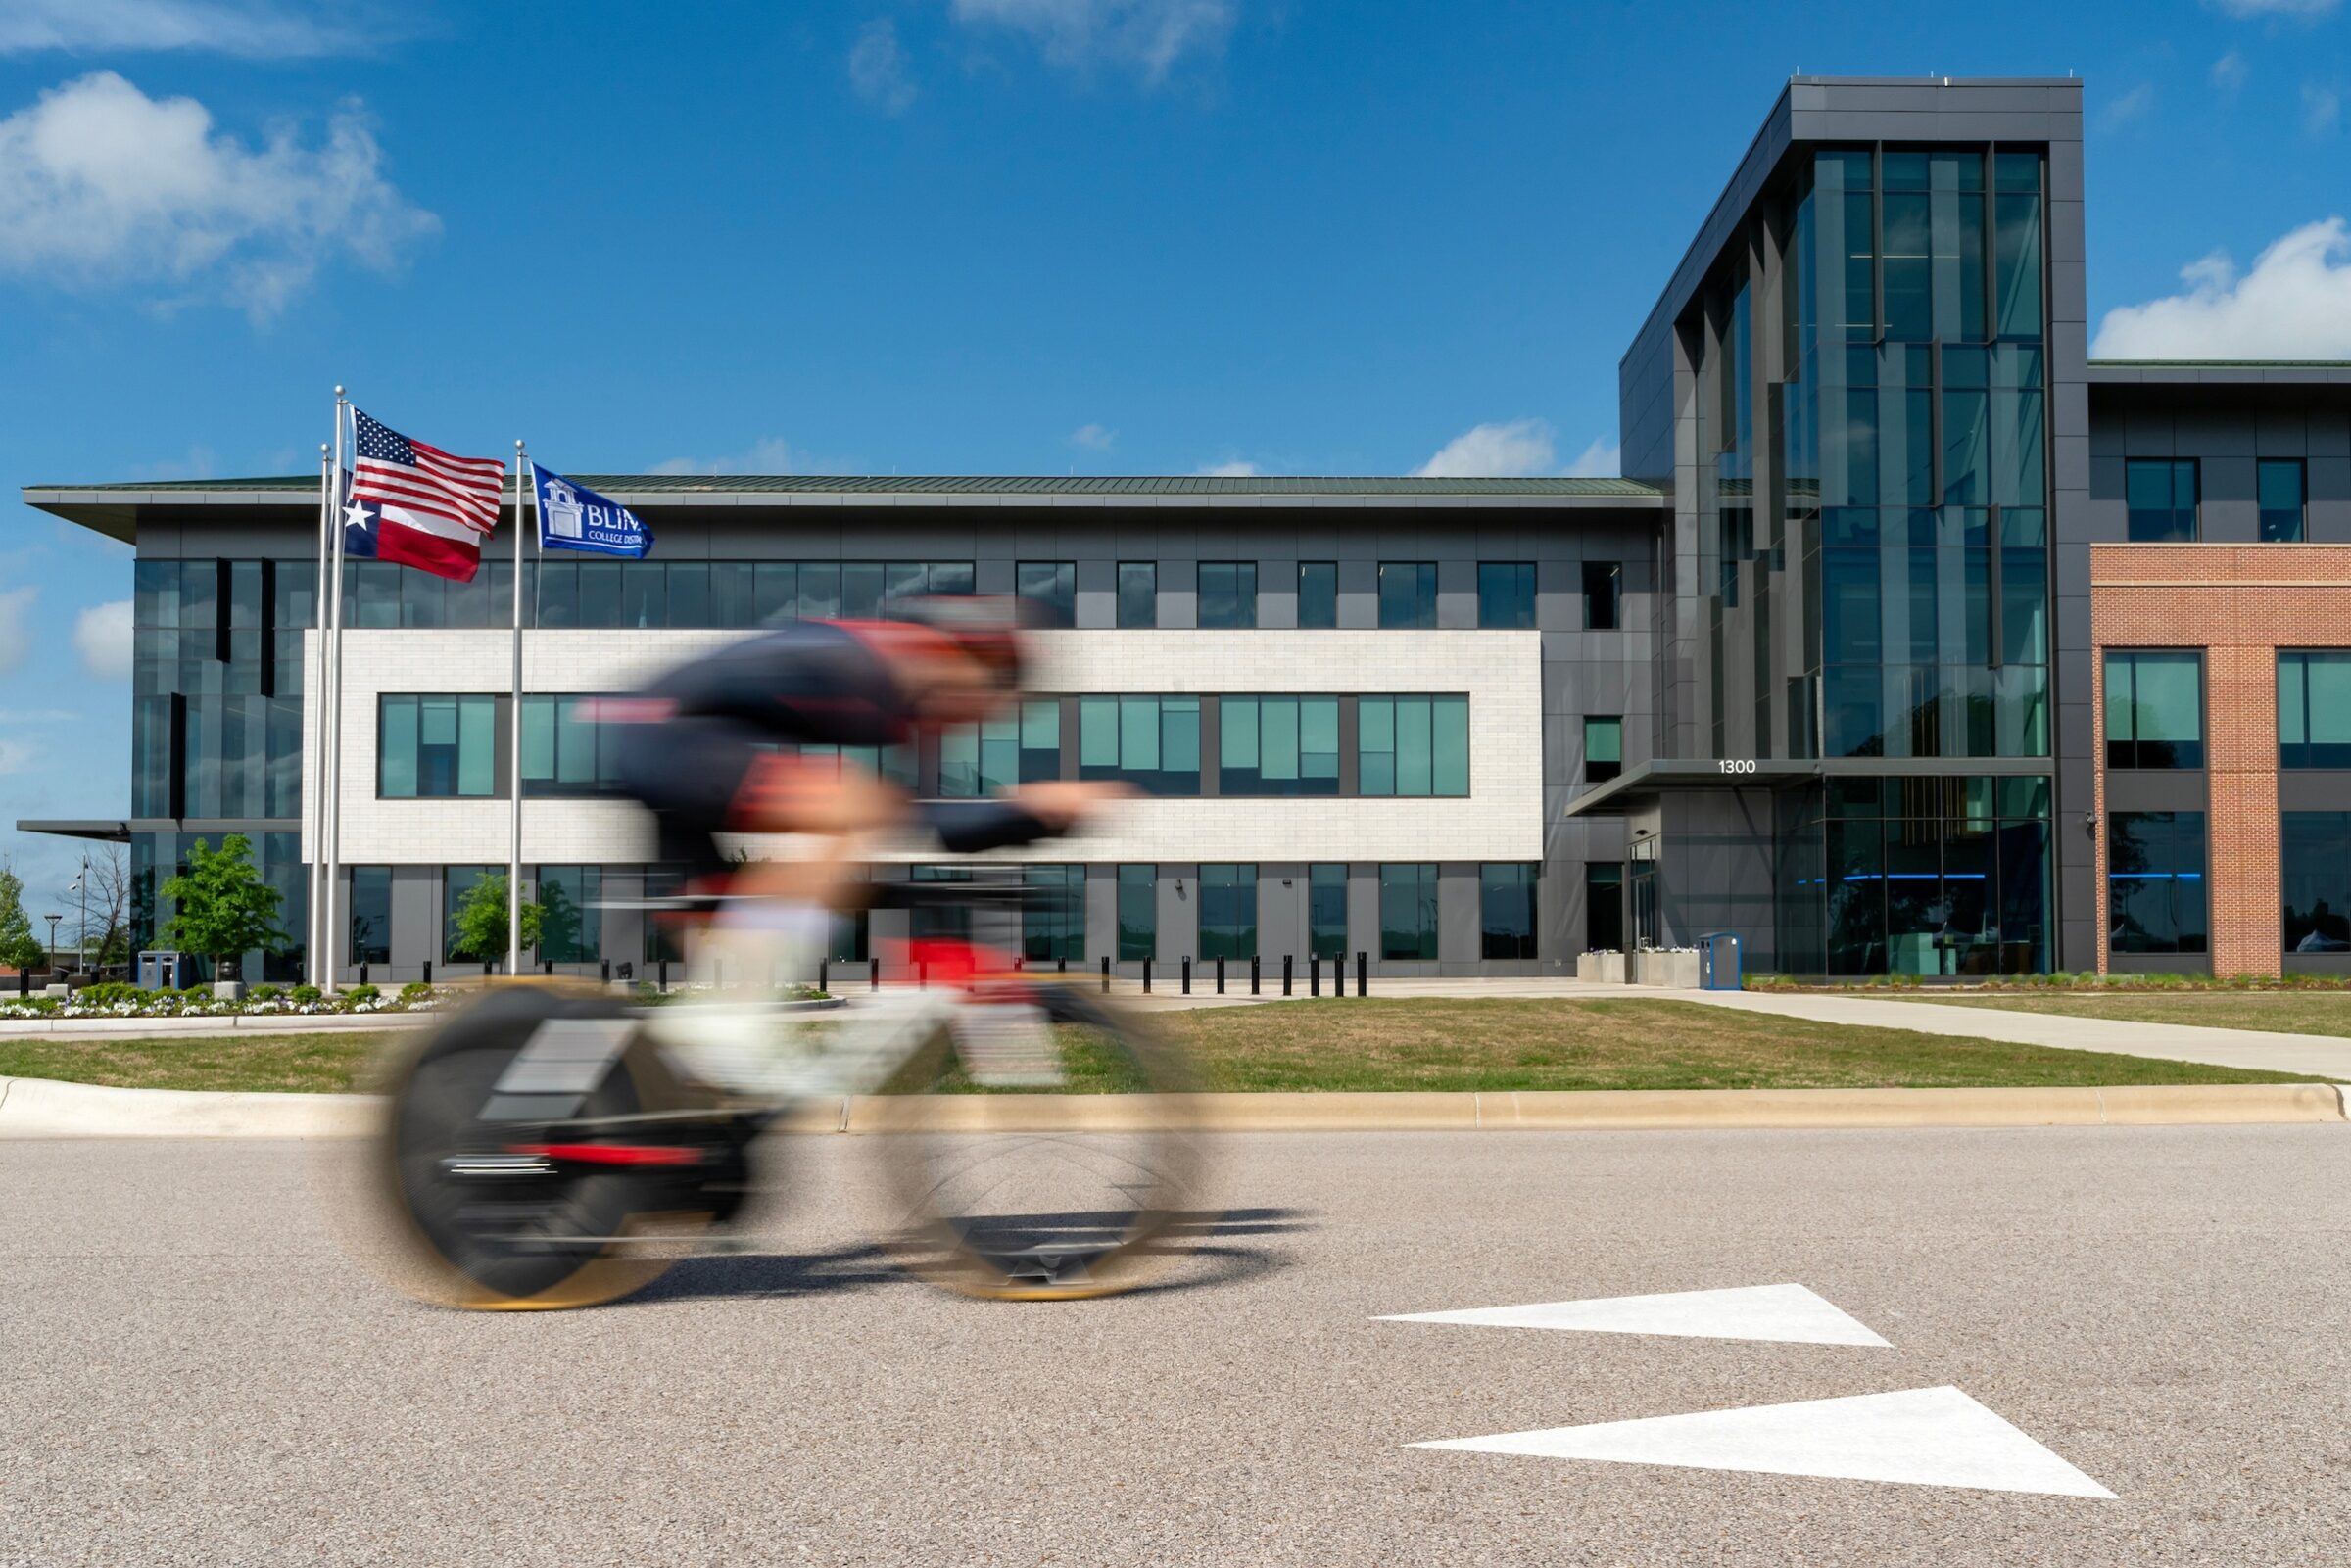 A bicyclist is blurred as they pedal past a building on the RELLIS Campus